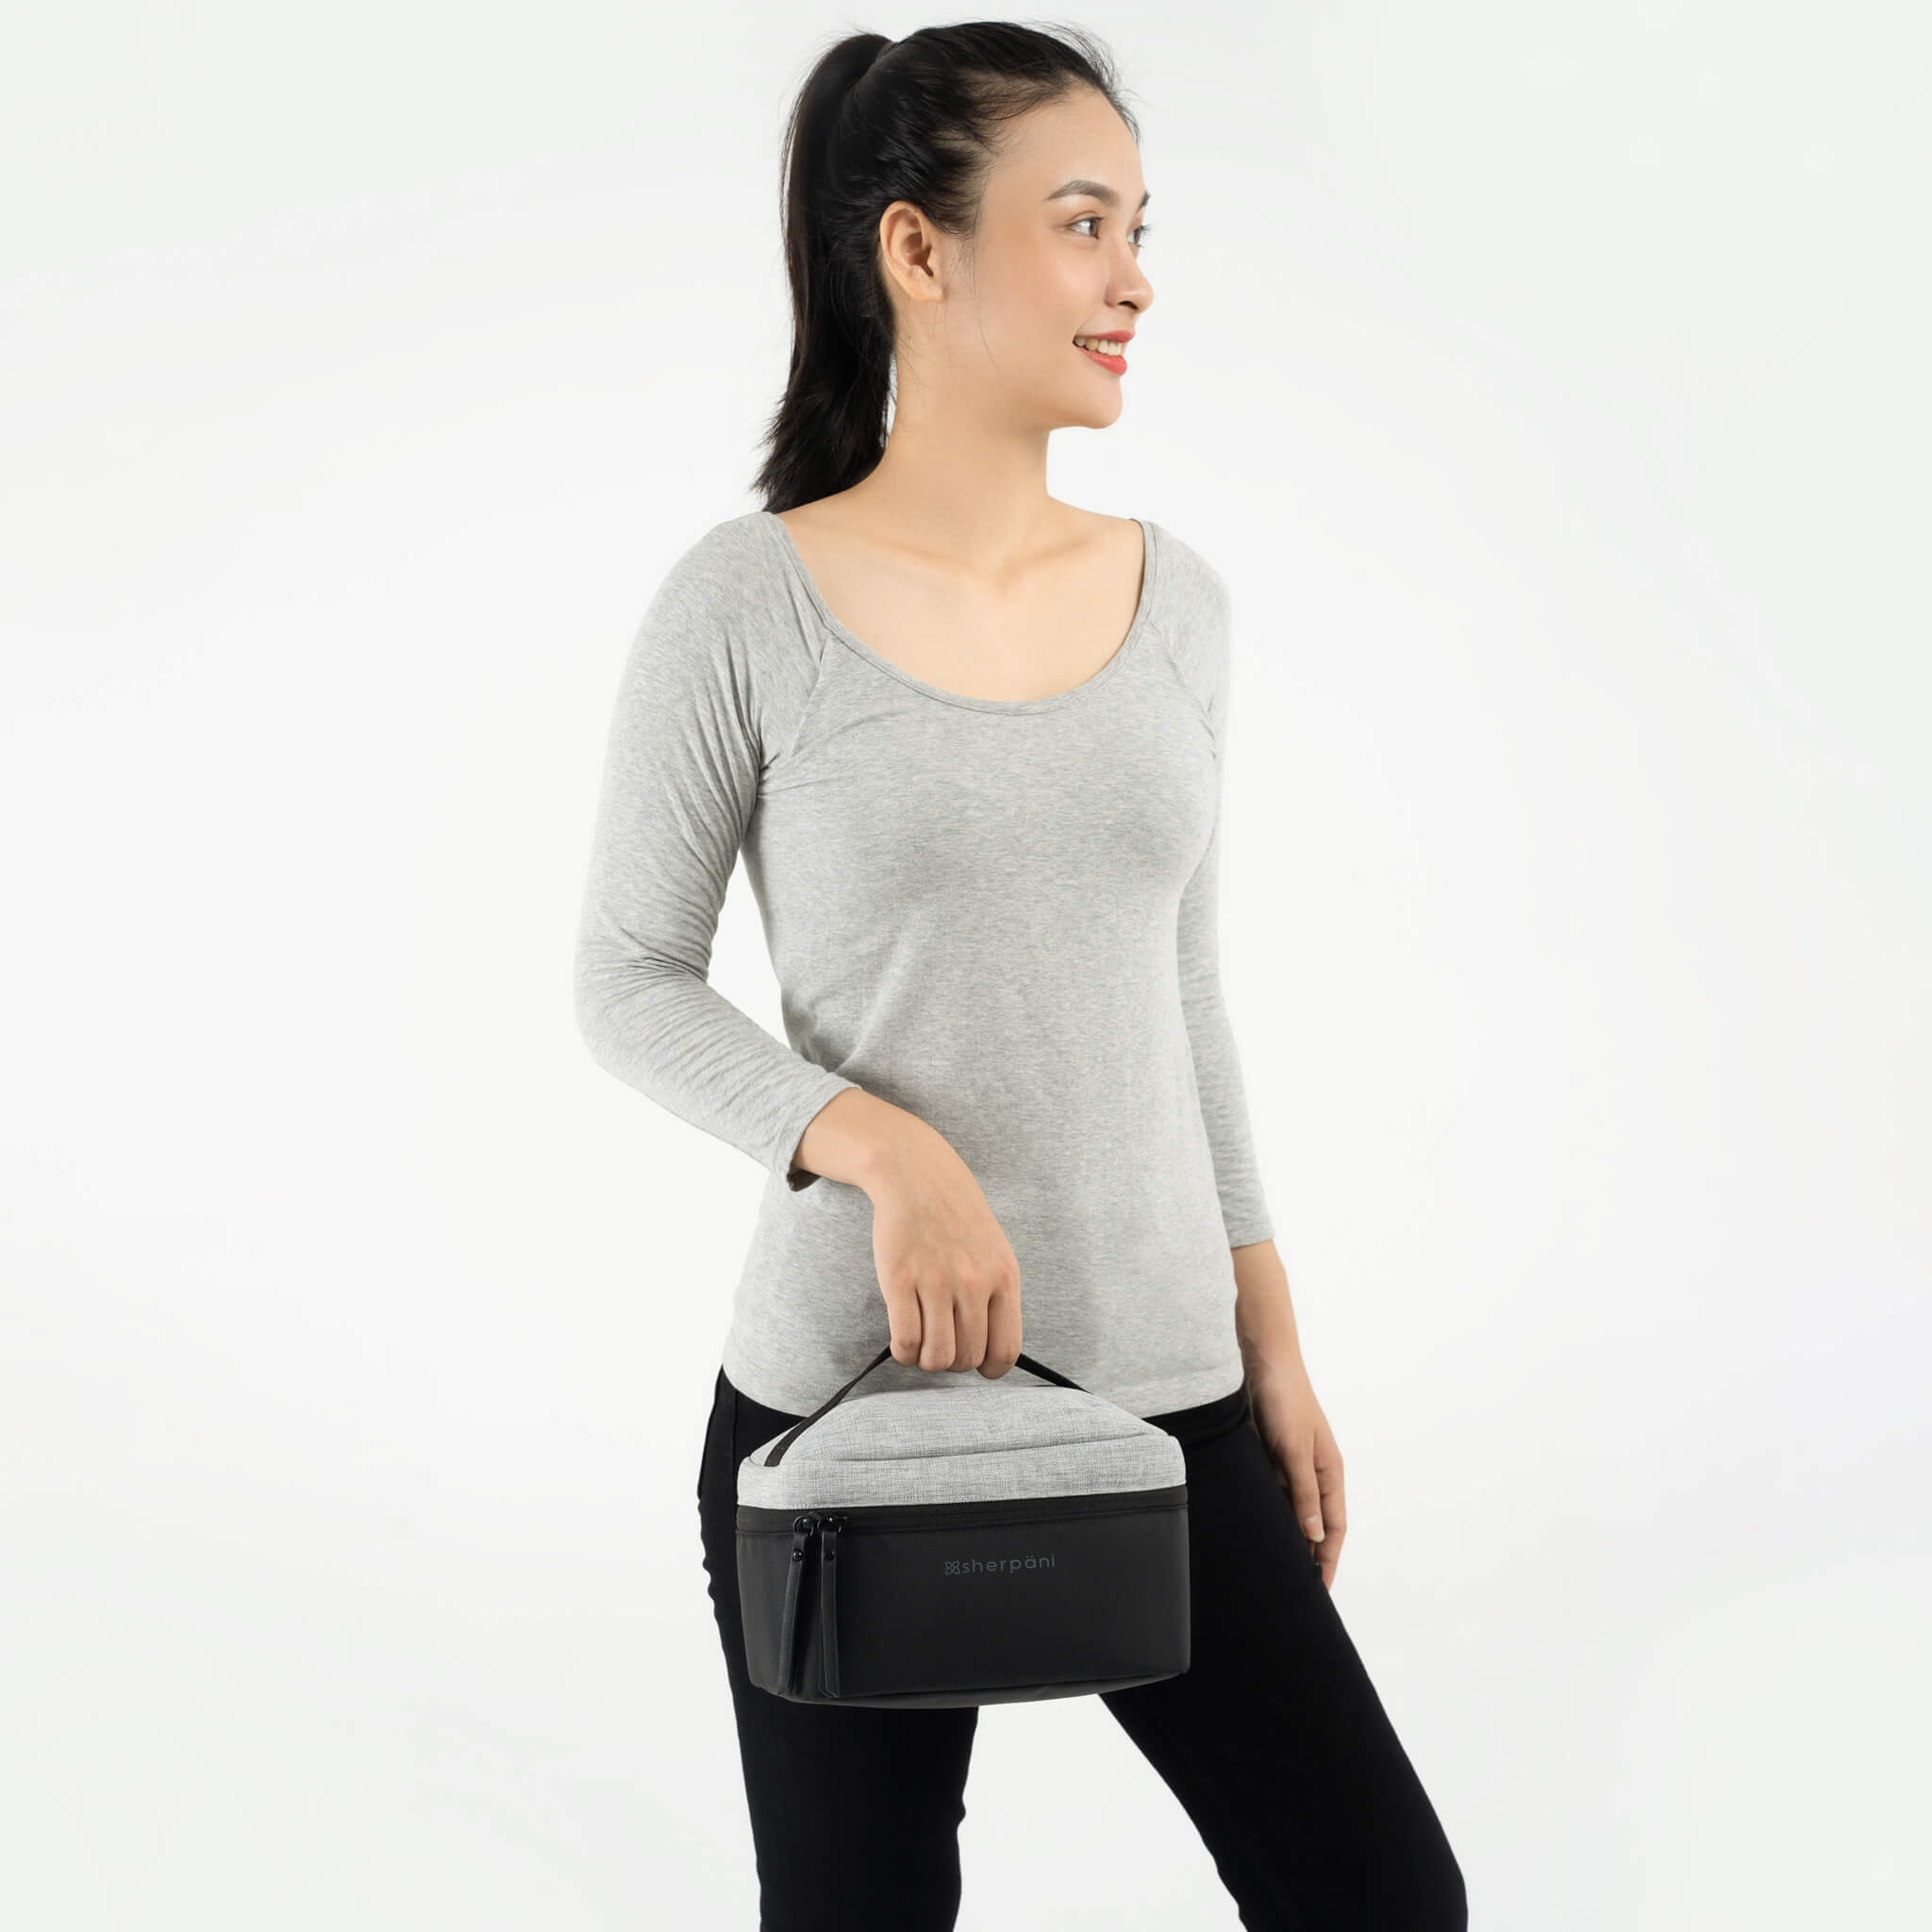 A model wearing black leggings and a gray top is holding Sherpani travel accessory the Savannah. 